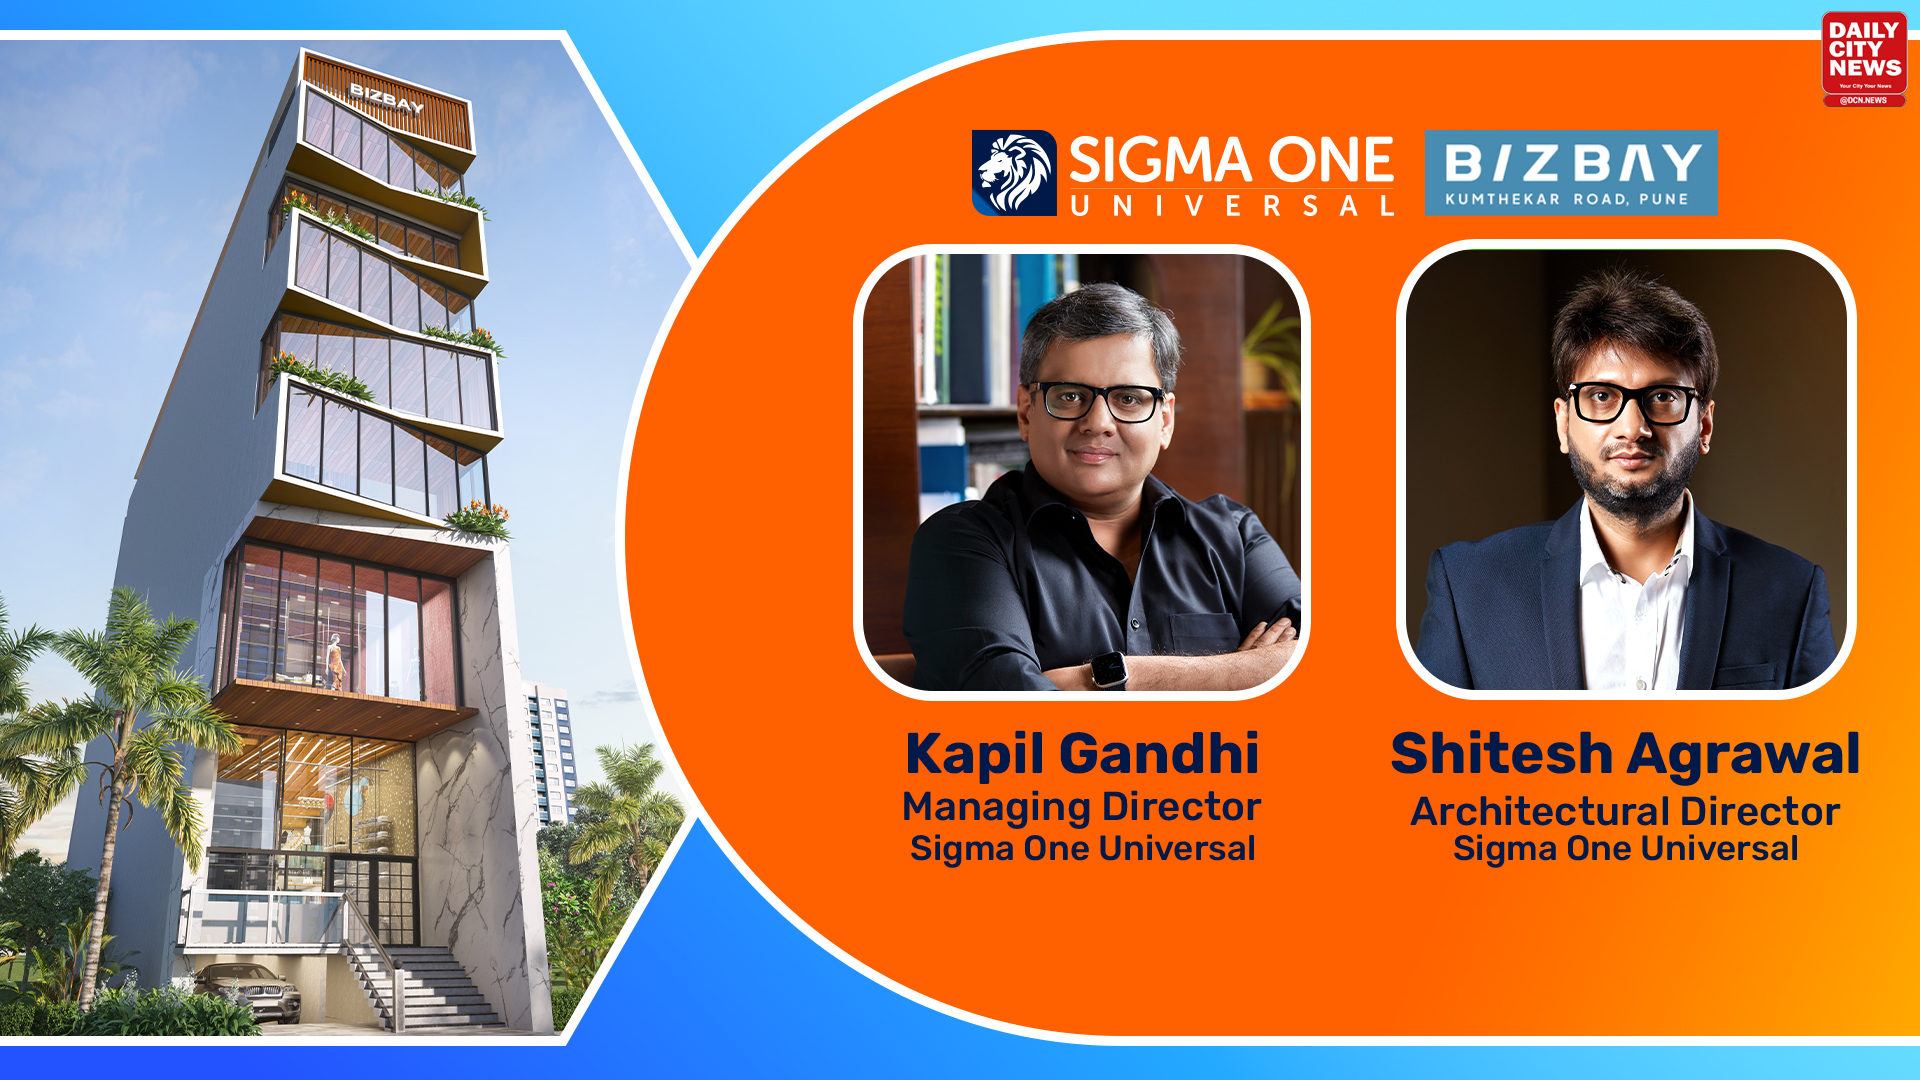 Kumthekar Road, Pune's Busiest Shopping Destination Embraces Modernity with the Launch of Sigma One Bizbay